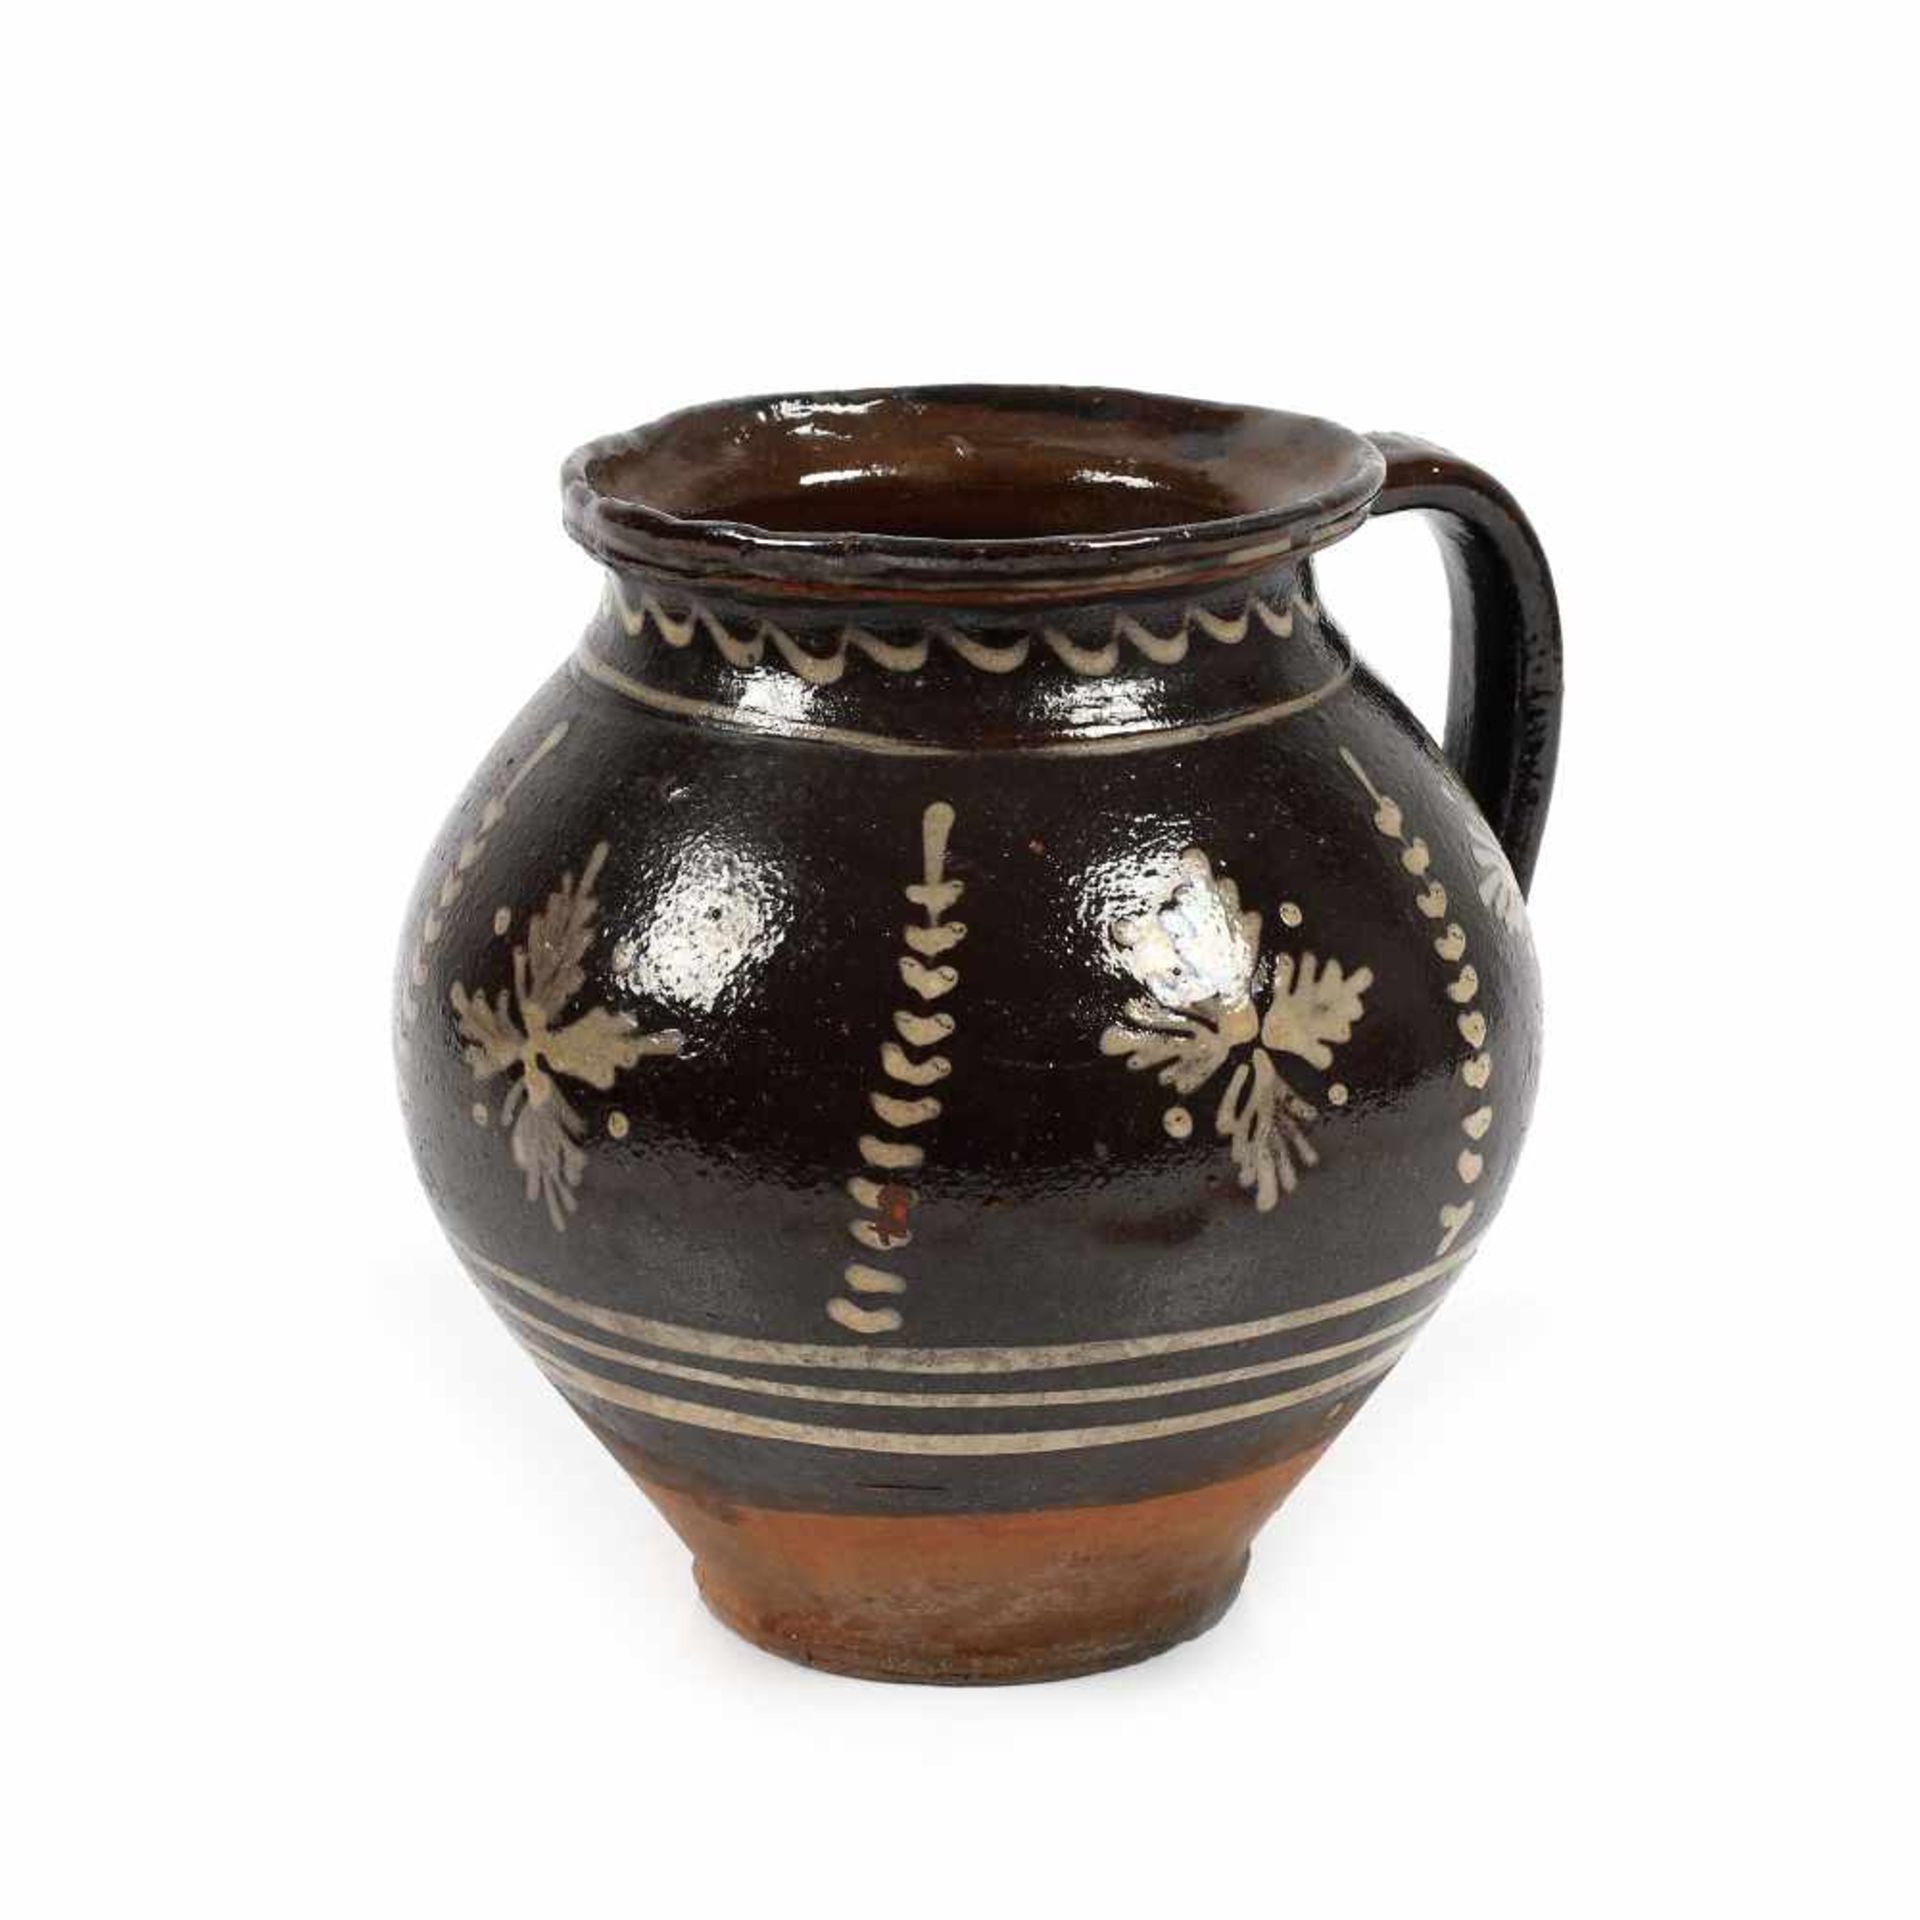 Wine cup, decorated with vegetal motifs, Huedin area, approx. 1900